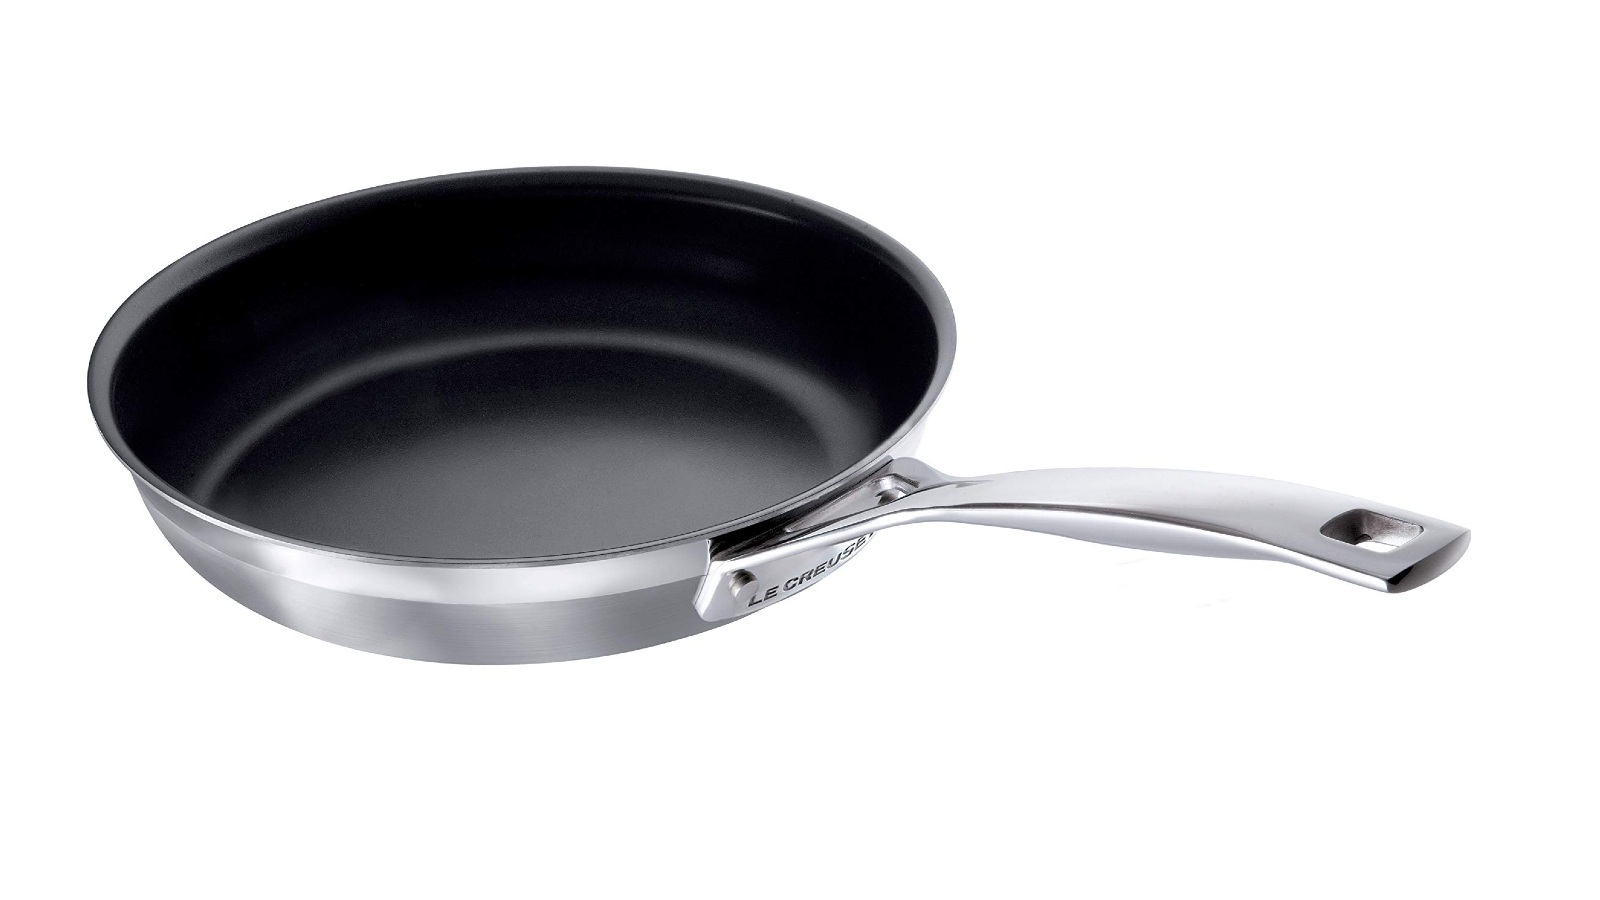 Le Creuset Stainless Steel Saucepan with Lid & Reviews